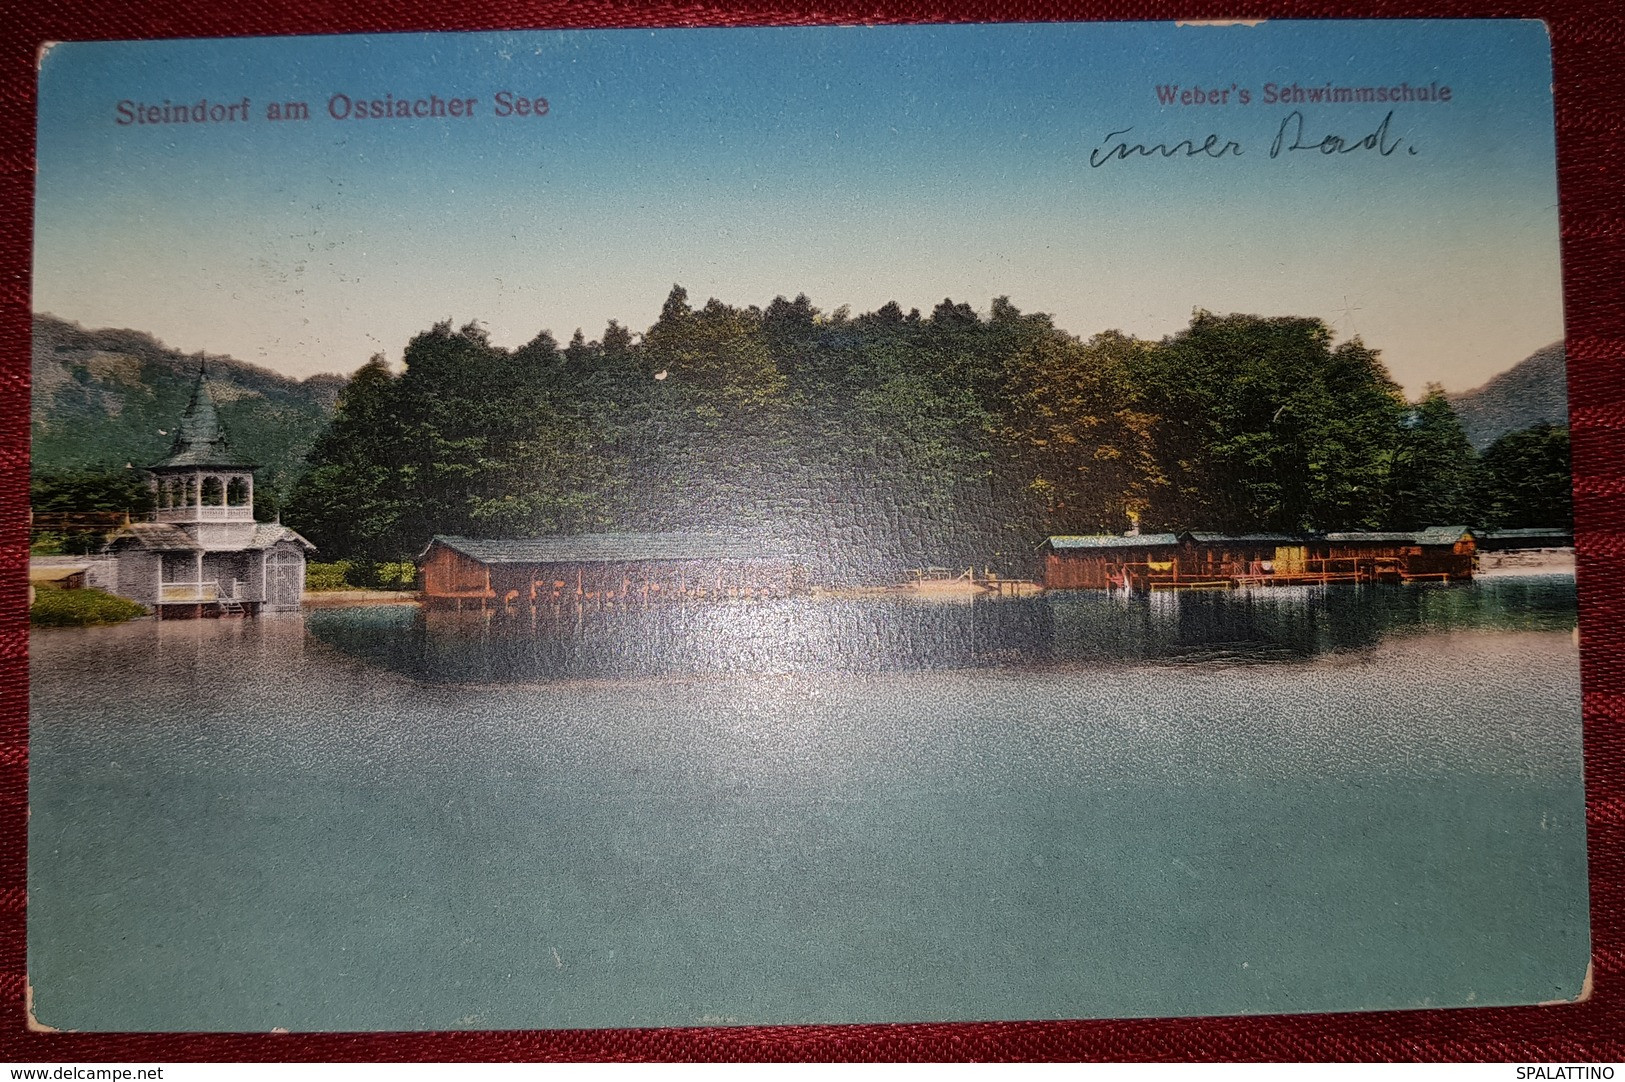 STEINDORF AM OSSIACHER SEE, ORIGINAL OLD POSTCARD - Ossiachersee-Orte